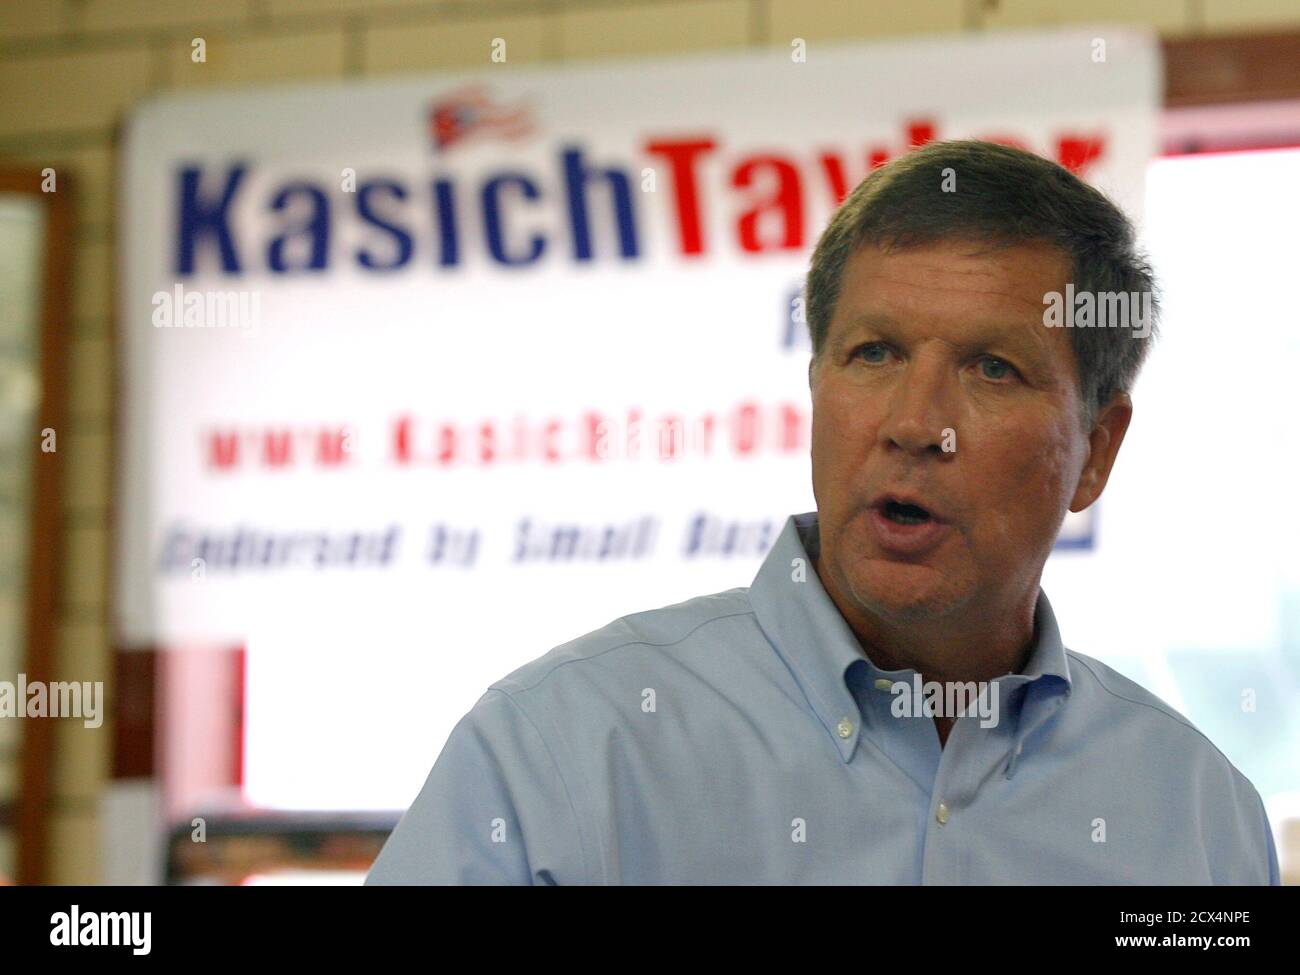 Republican gubernatorial candidate John Kasich (R-OH) speaks to supporters during a campaign stop in Zanesville, Ohio, August 4, 2010. As Lehman Brothers spiraled to its doom in the summer of 2008, Kasich could not help but worry. After all, Kasich, a former Ohio Congressman turned investment banker, had a chunk of his personal fortune invested in the free-falling firm. Picture taken August 4, 2010. To match Special Report USA-ELECTIONS/WALL-STREET REUTERS/Matt Sullivan    (UNITED STATES - Tags: ELECTIONS POLITICS BUSINESS) Stock Photo